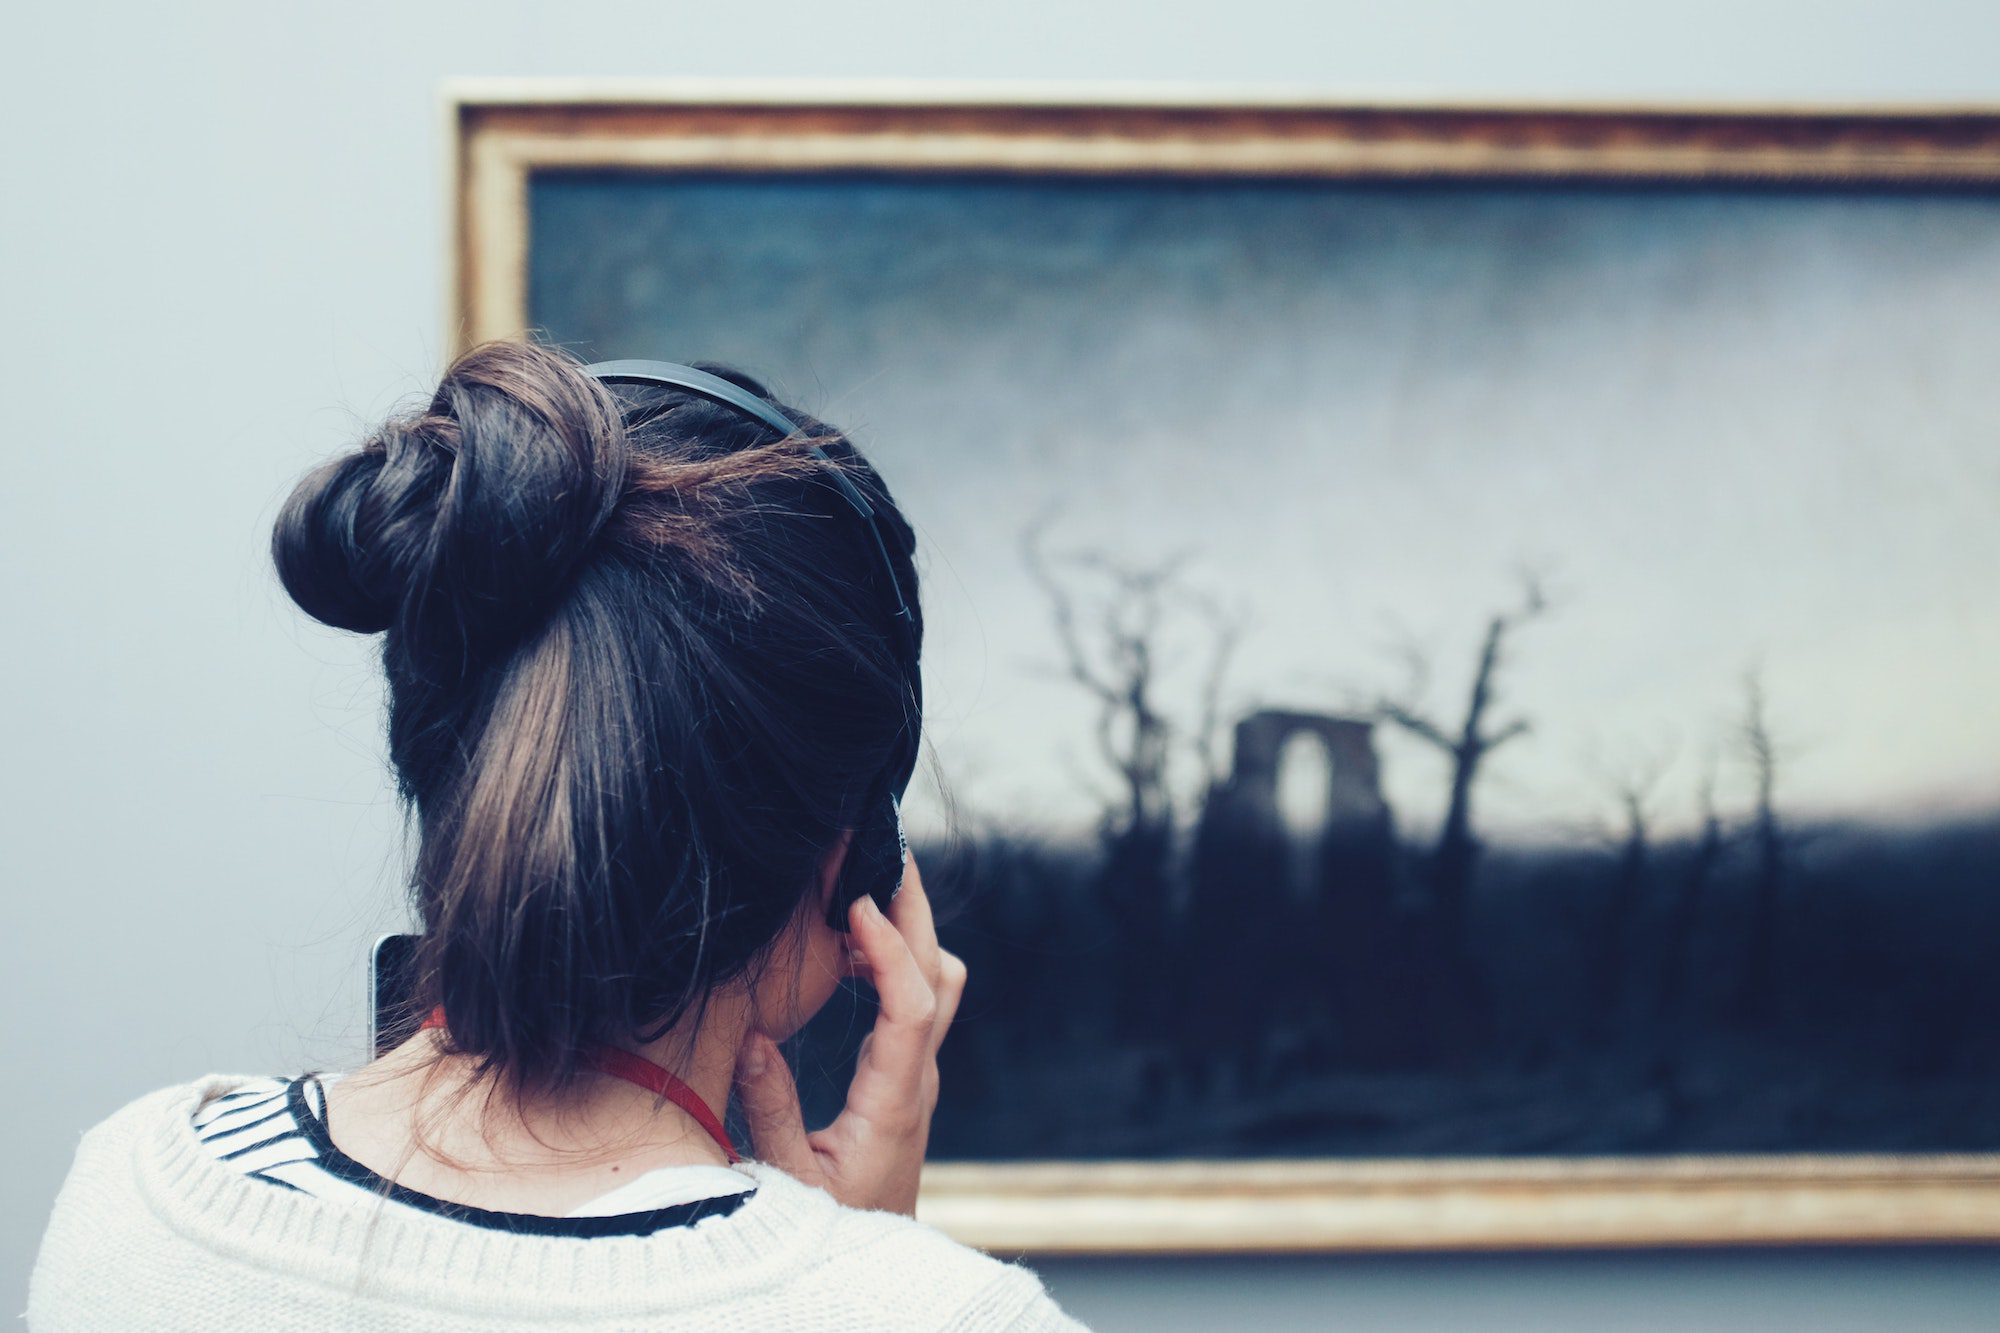 Woman looking at painting on museum wall.